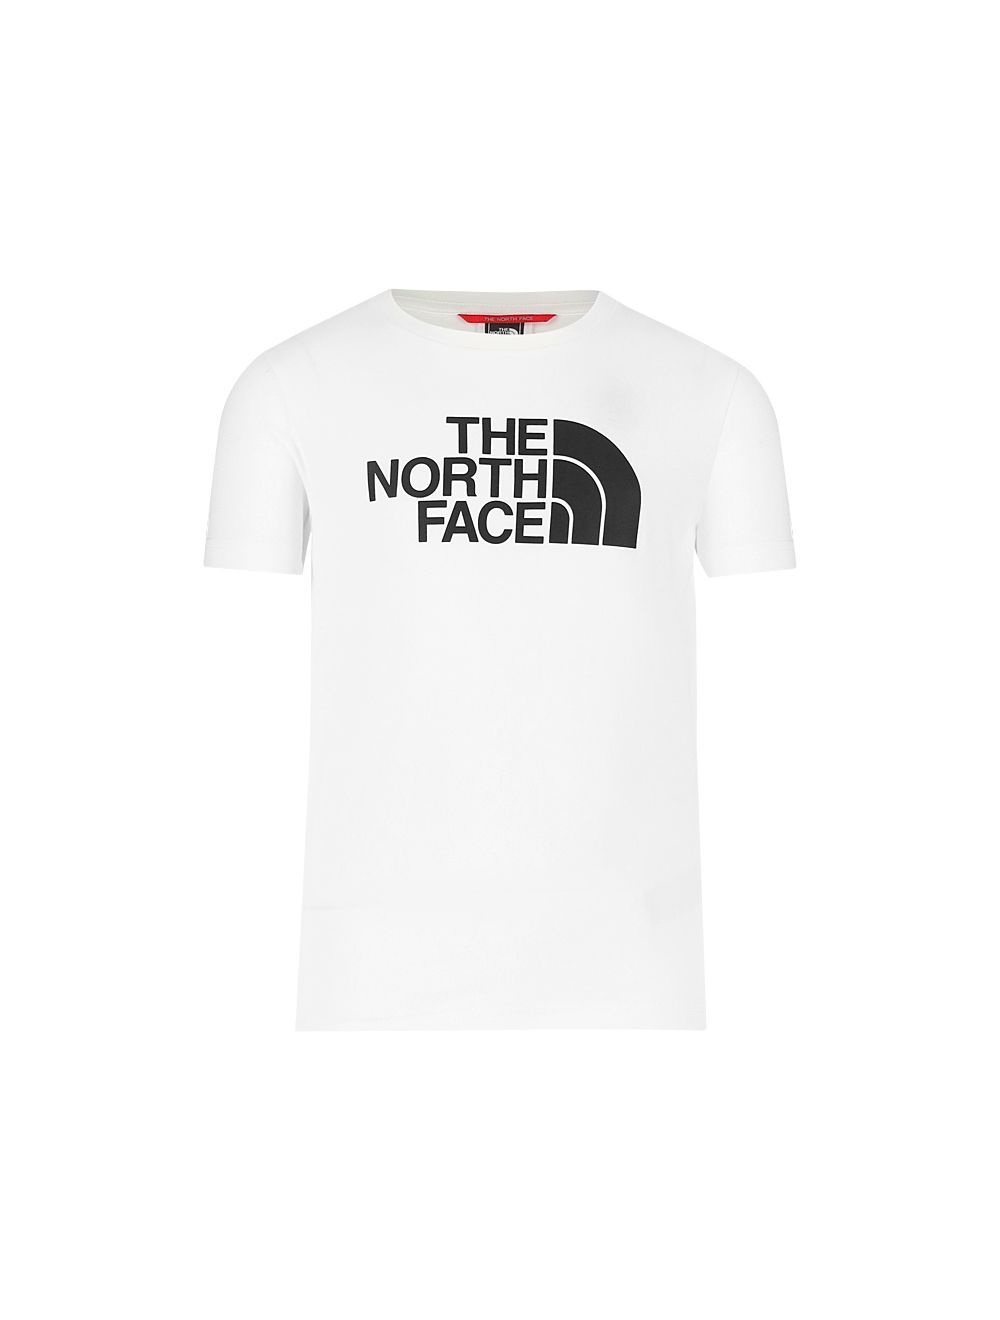 The North Face Easy Youth T-Shirt White/Black